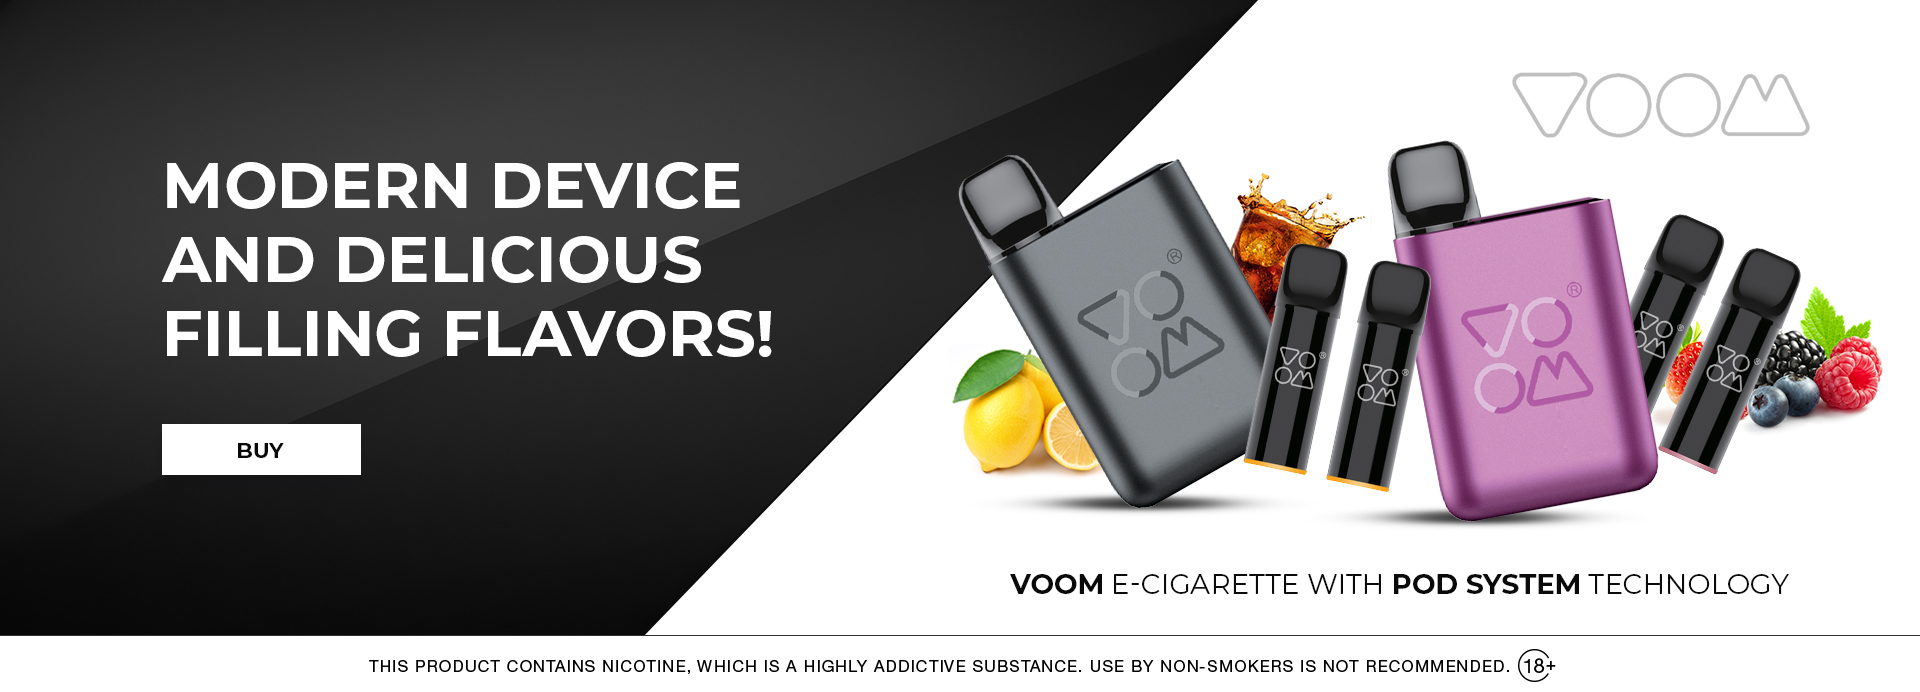 VOOM e-cigarette with POD system technology